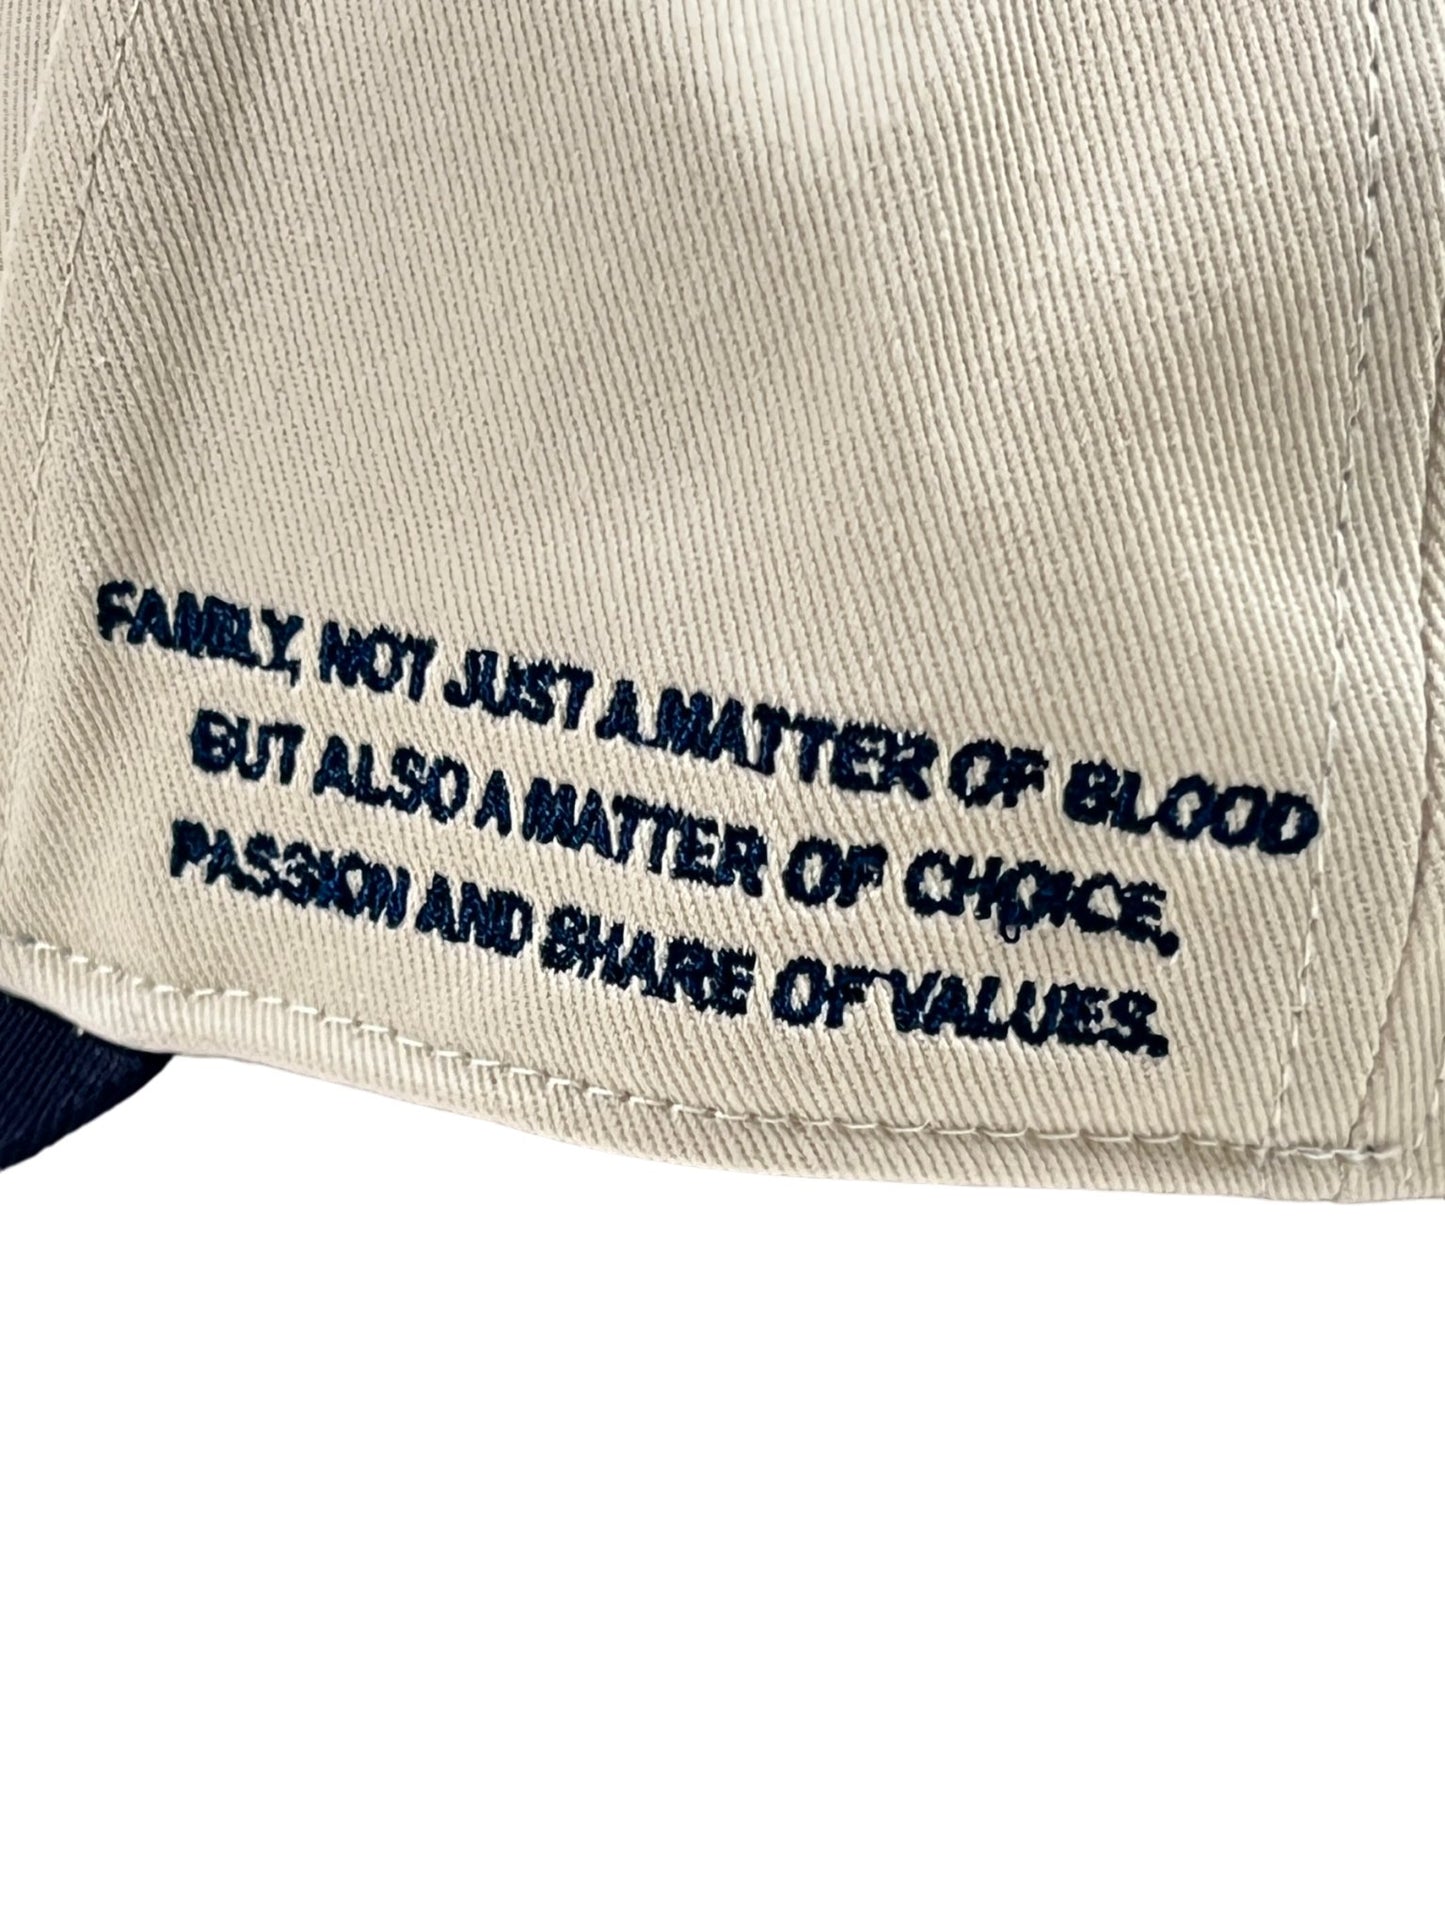 An FAMILY FIRST HF2402 hat with the words, "Failure is not a matter of blood, it's also a matter of choice.